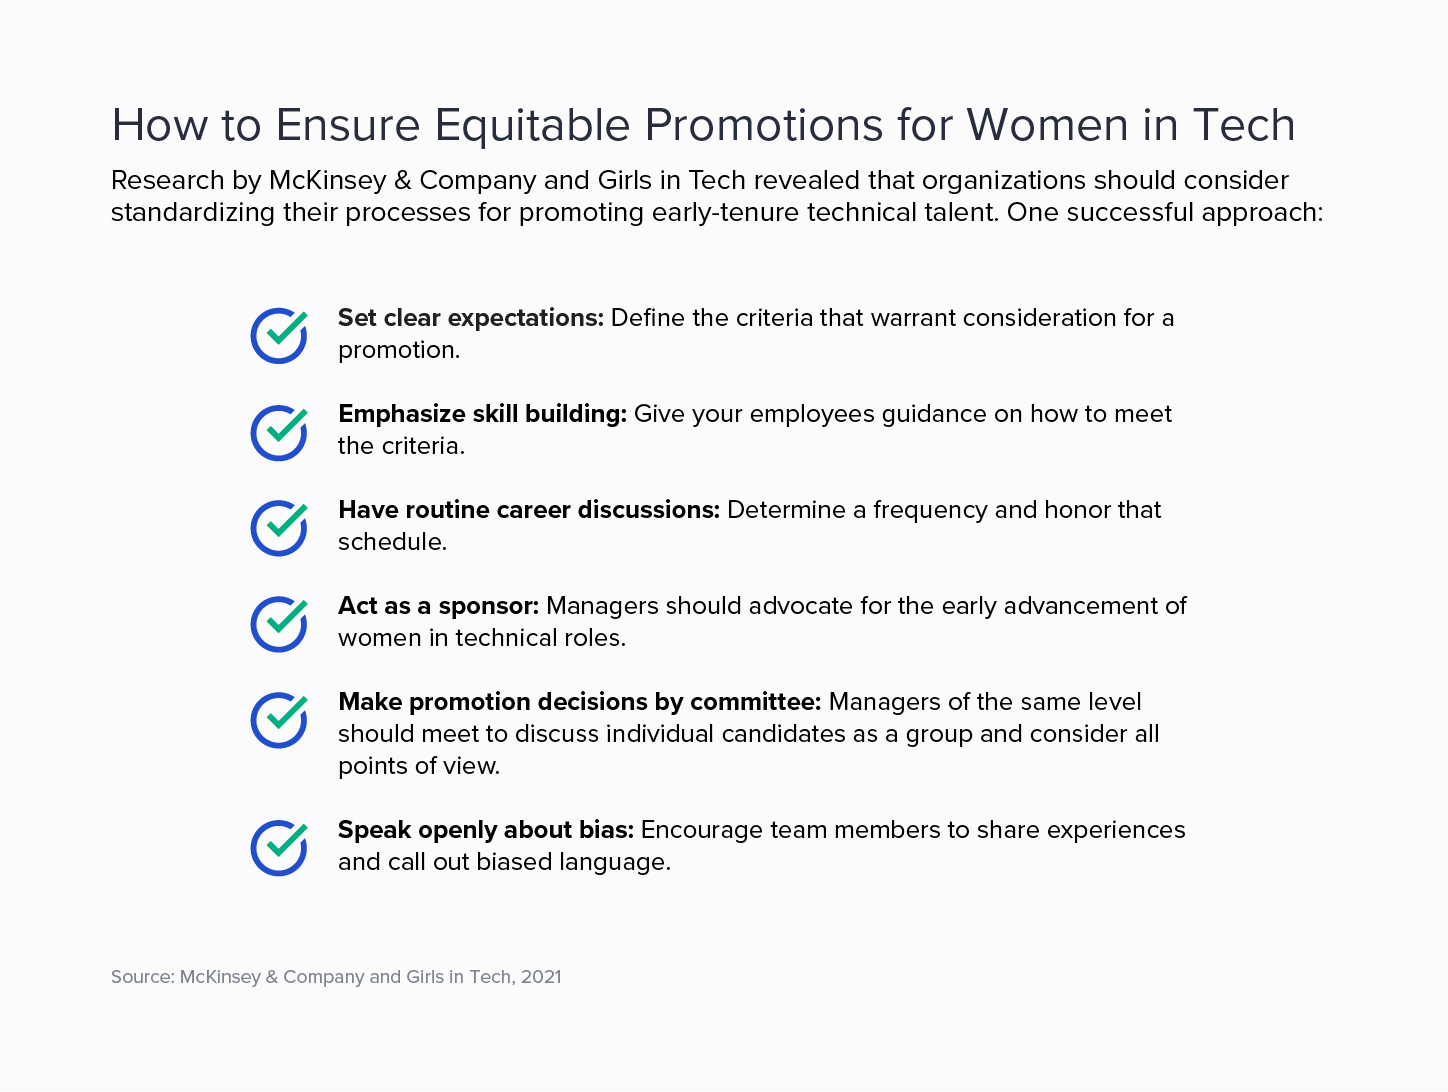 A graphic with the headline How to Ensure Equitable Promotions for Women in Tech and a subtitle that reads: Research by McKinsey & Company and Girls in Tech revealed that organizations should consider standardizing their processes for promoting early-tenure technical talent. One successful approach suggests managers should set clear expectations, emphasize skill building, have routine career discussions, act as a sponsor, make promotion decisions by committee, and speak openly about bias.